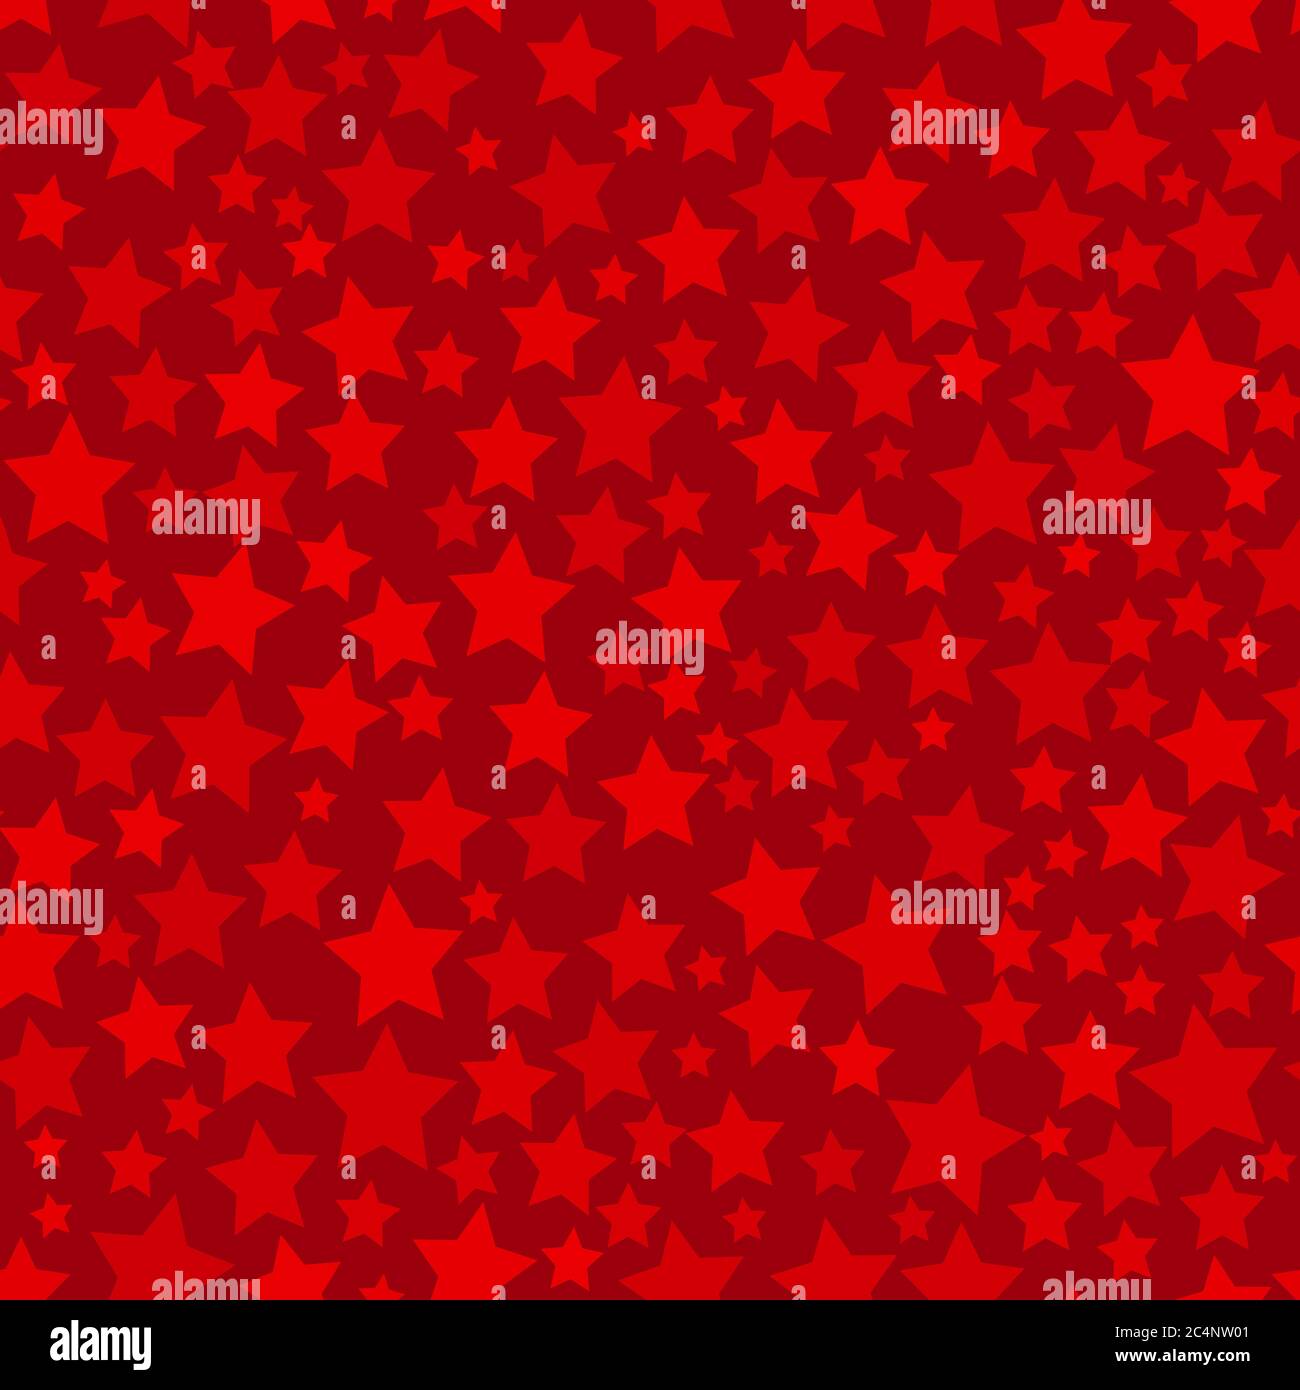 Abstract seamless pattern of stars of different sizes in red colors Stock Vector